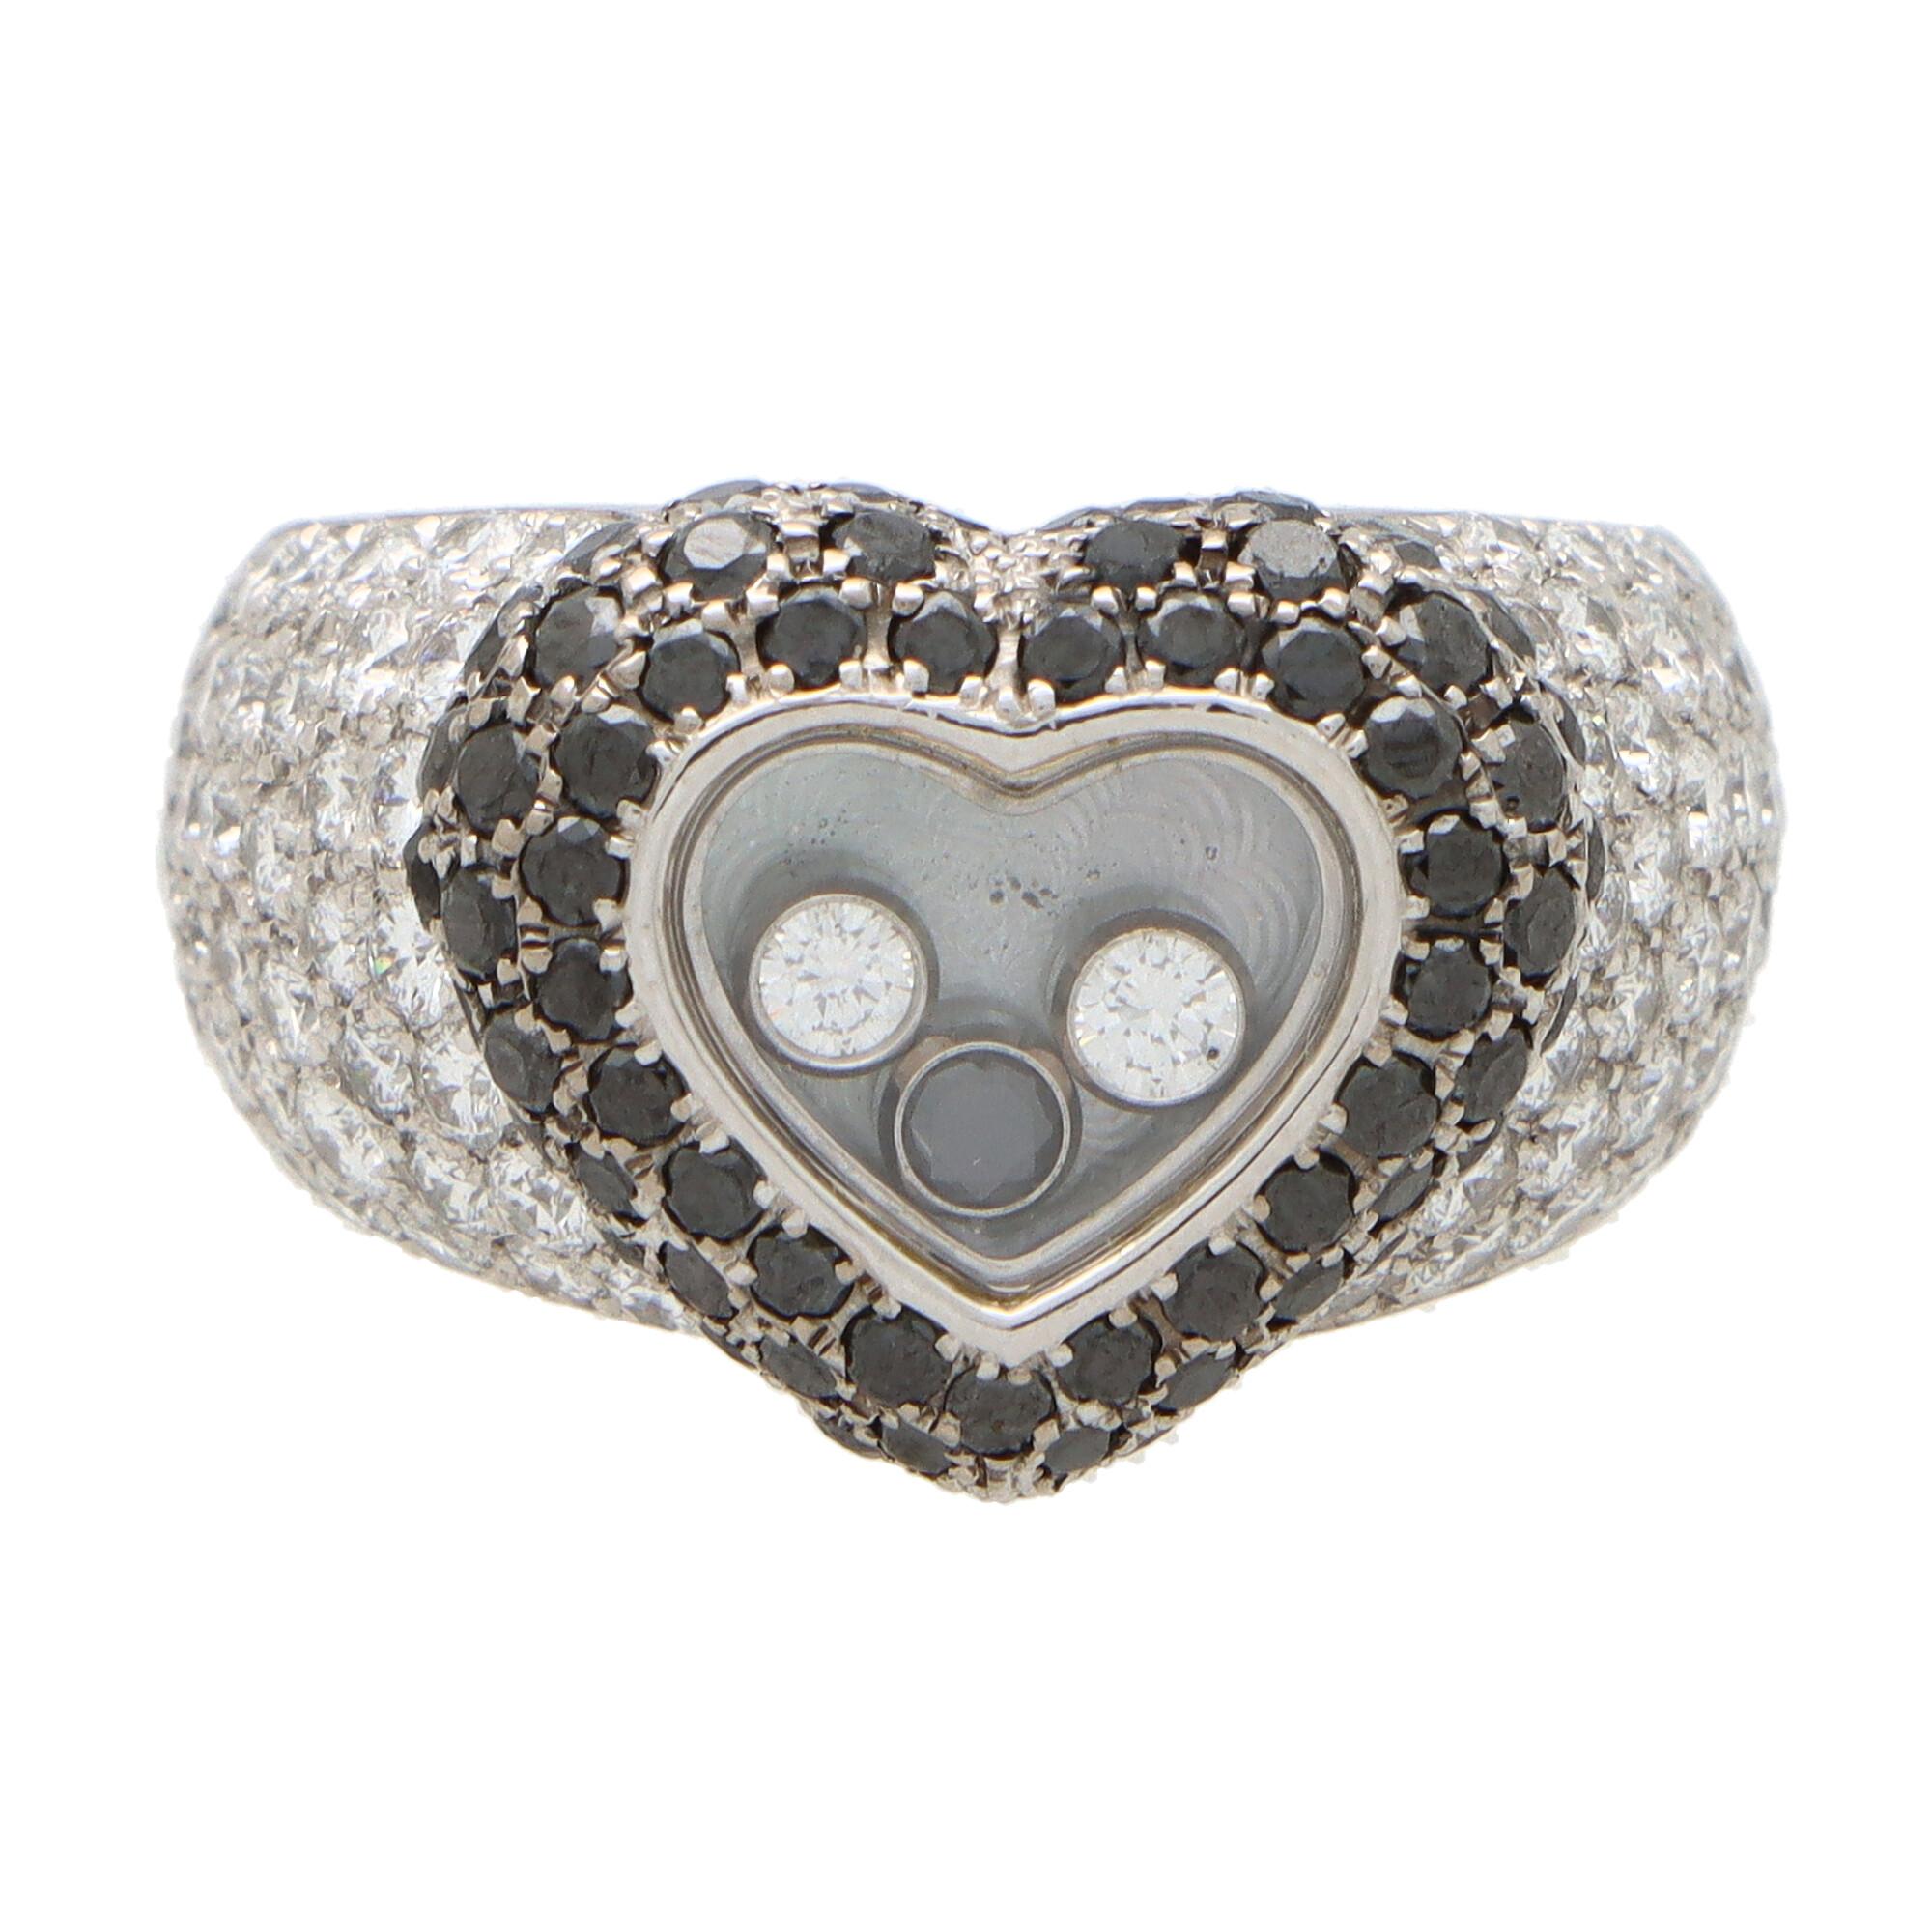 Vintage Chopard Black and White Diamond 'Happy Diamonds' Cocktail Ring in Gold